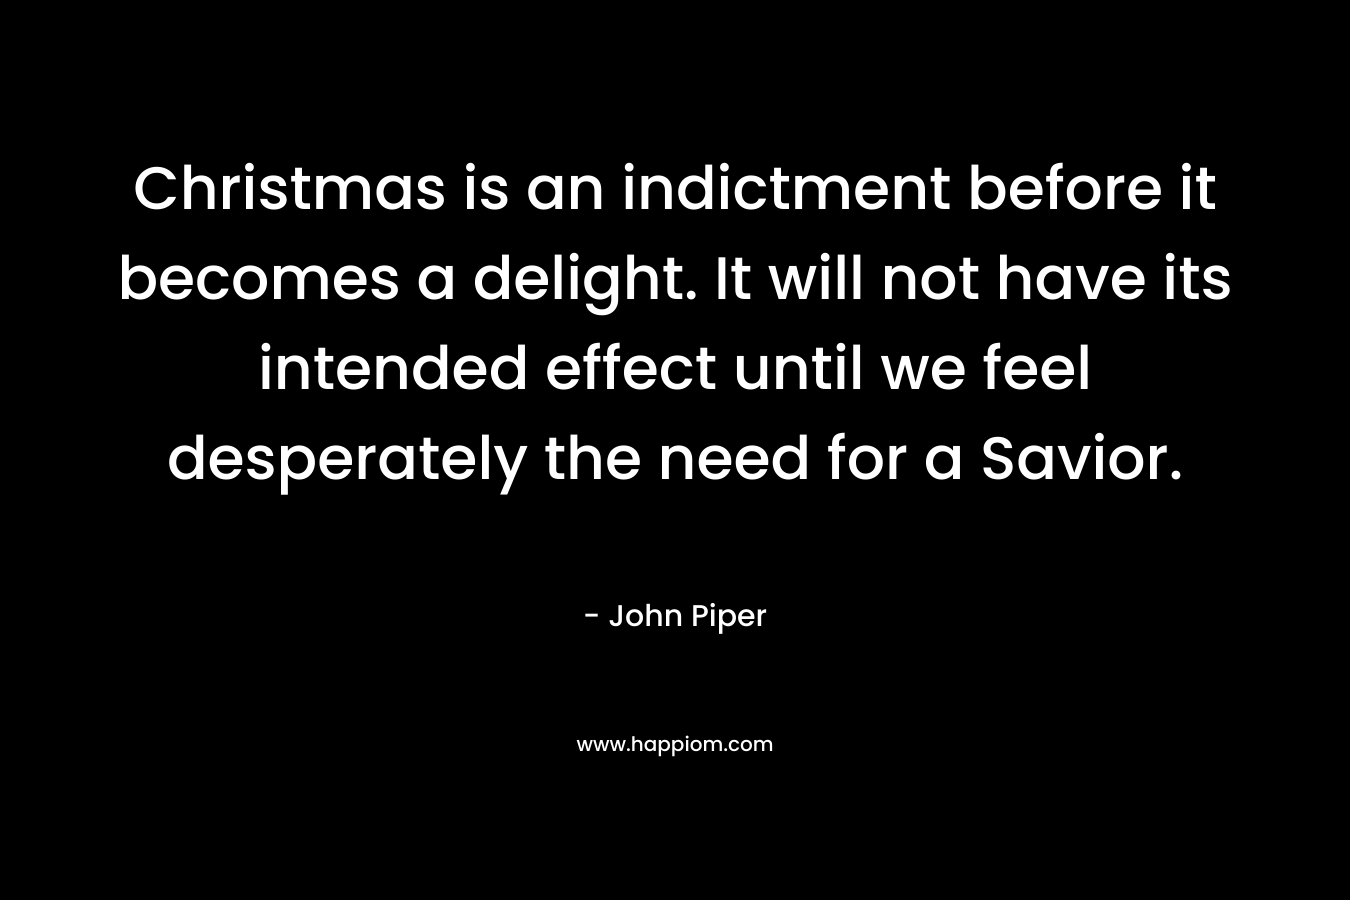 Christmas is an indictment before it becomes a delight. It will not have its intended effect until we feel desperately the need for a Savior.